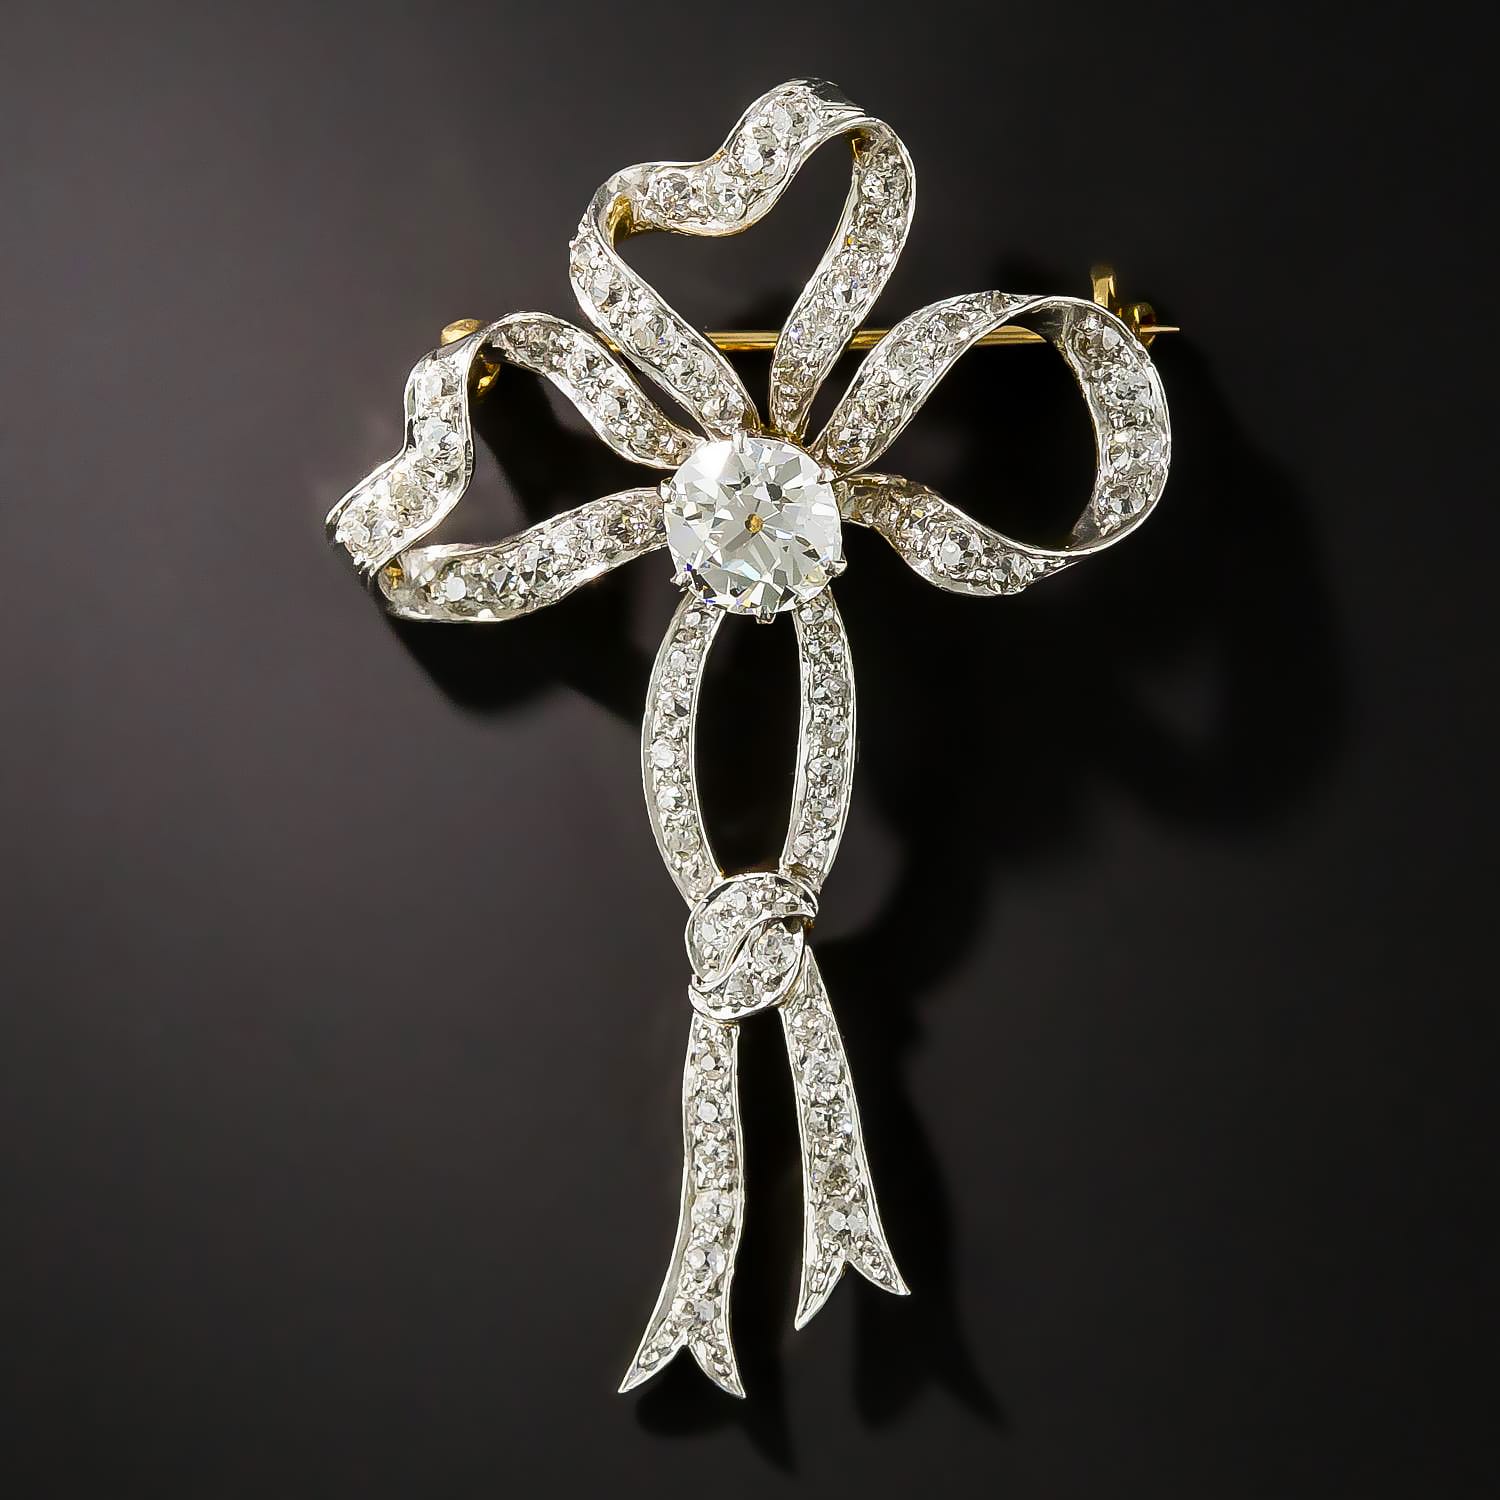 A Three-Loop Edwardian Bow Brooch in Platinum Over Gold 